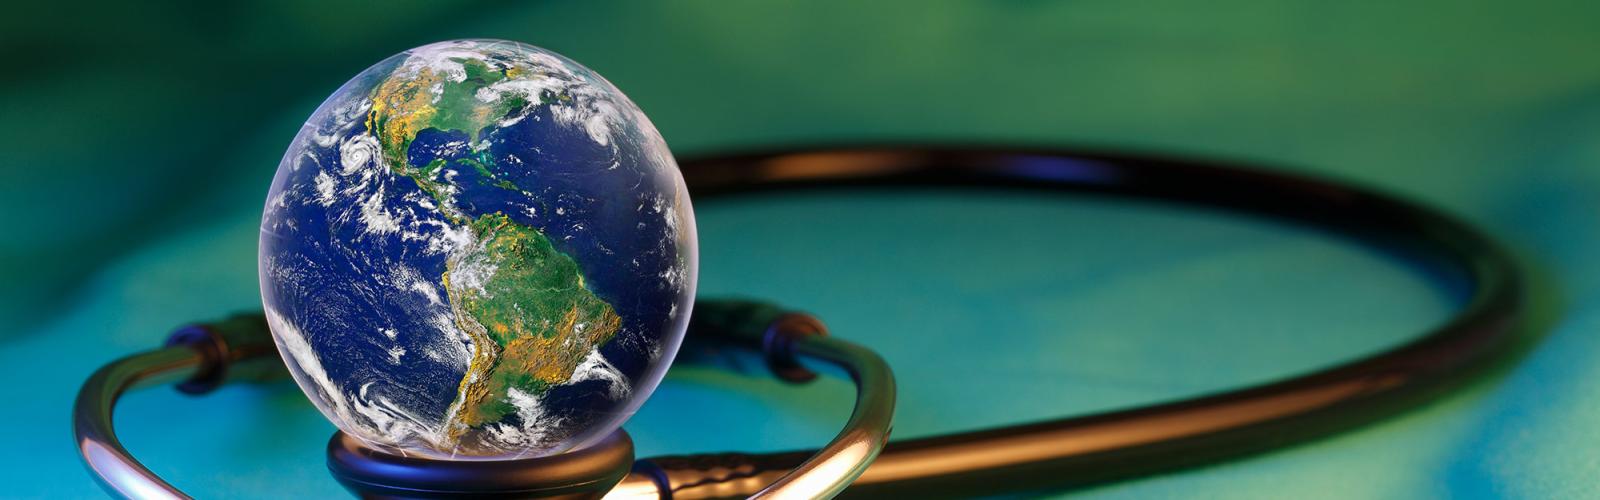 A small world sitting on top of a stethoscope 